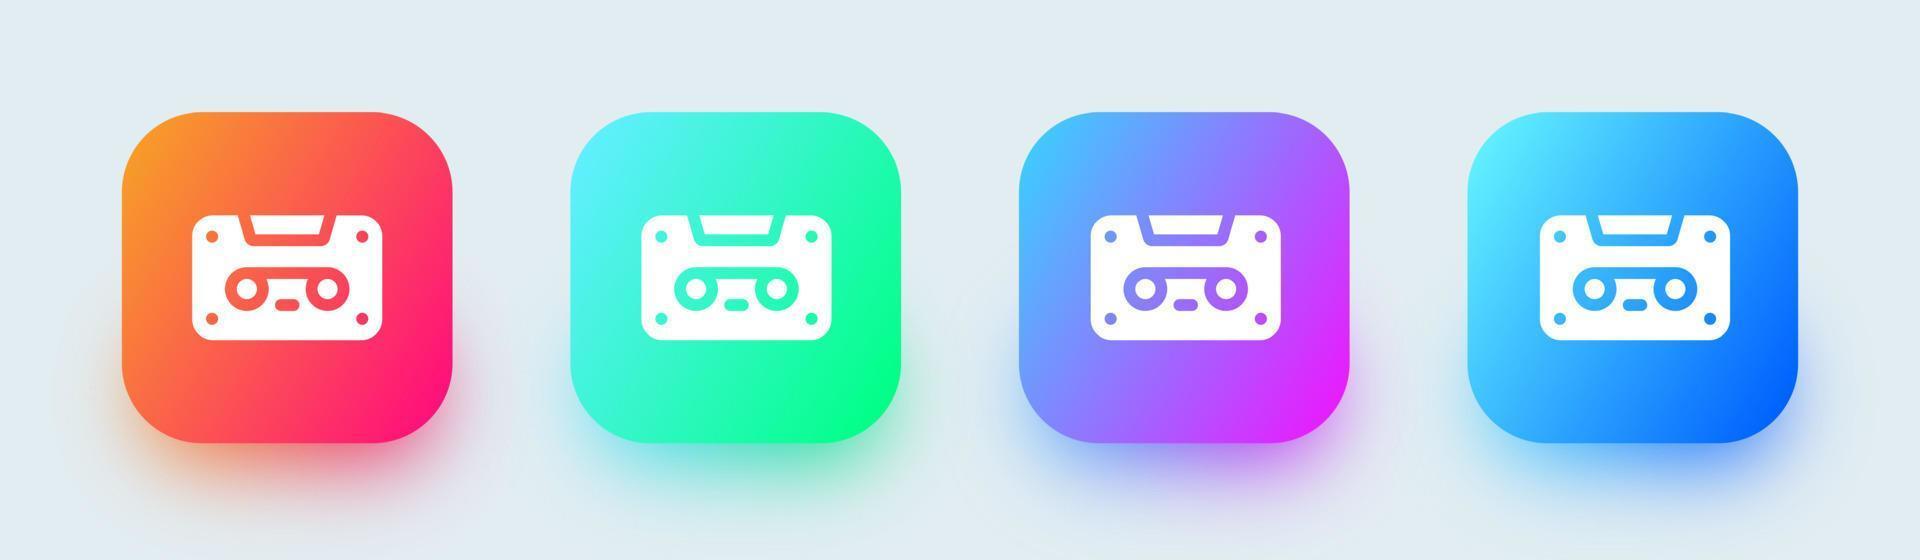 Cassette solid icon in square gradient colors. Mixtape signs vector illustration.